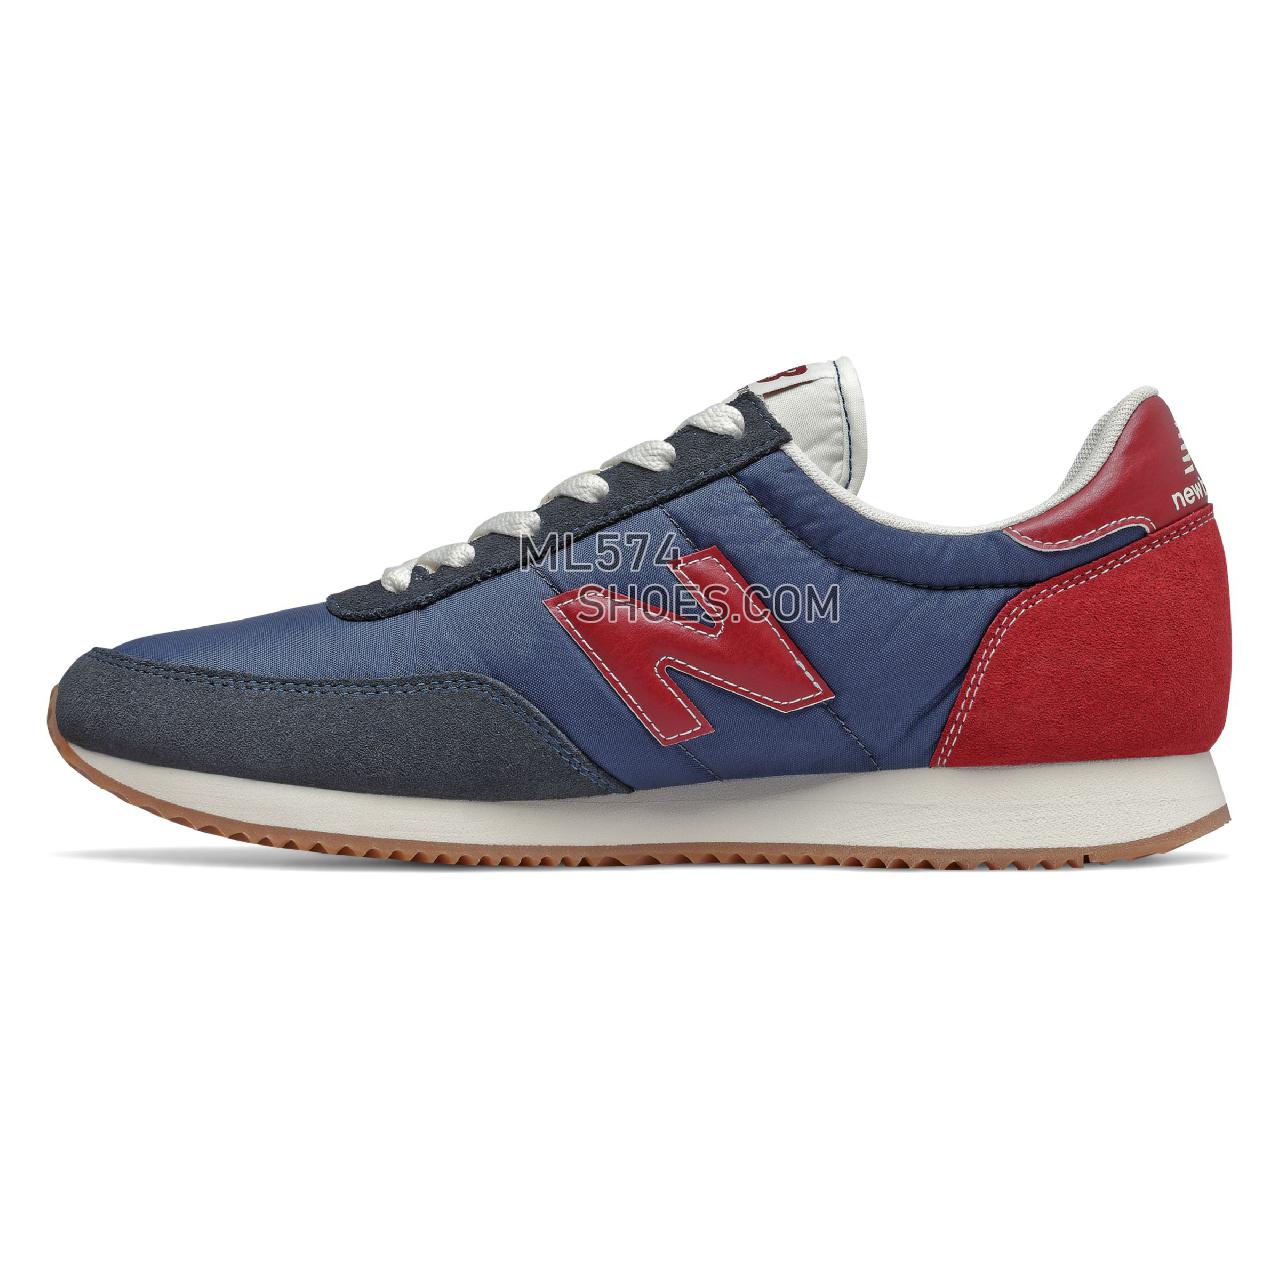 New Balance Unisex 720 - Men's 720 Classic - Moroccan Tile with NB Scarlet - UL720ZD